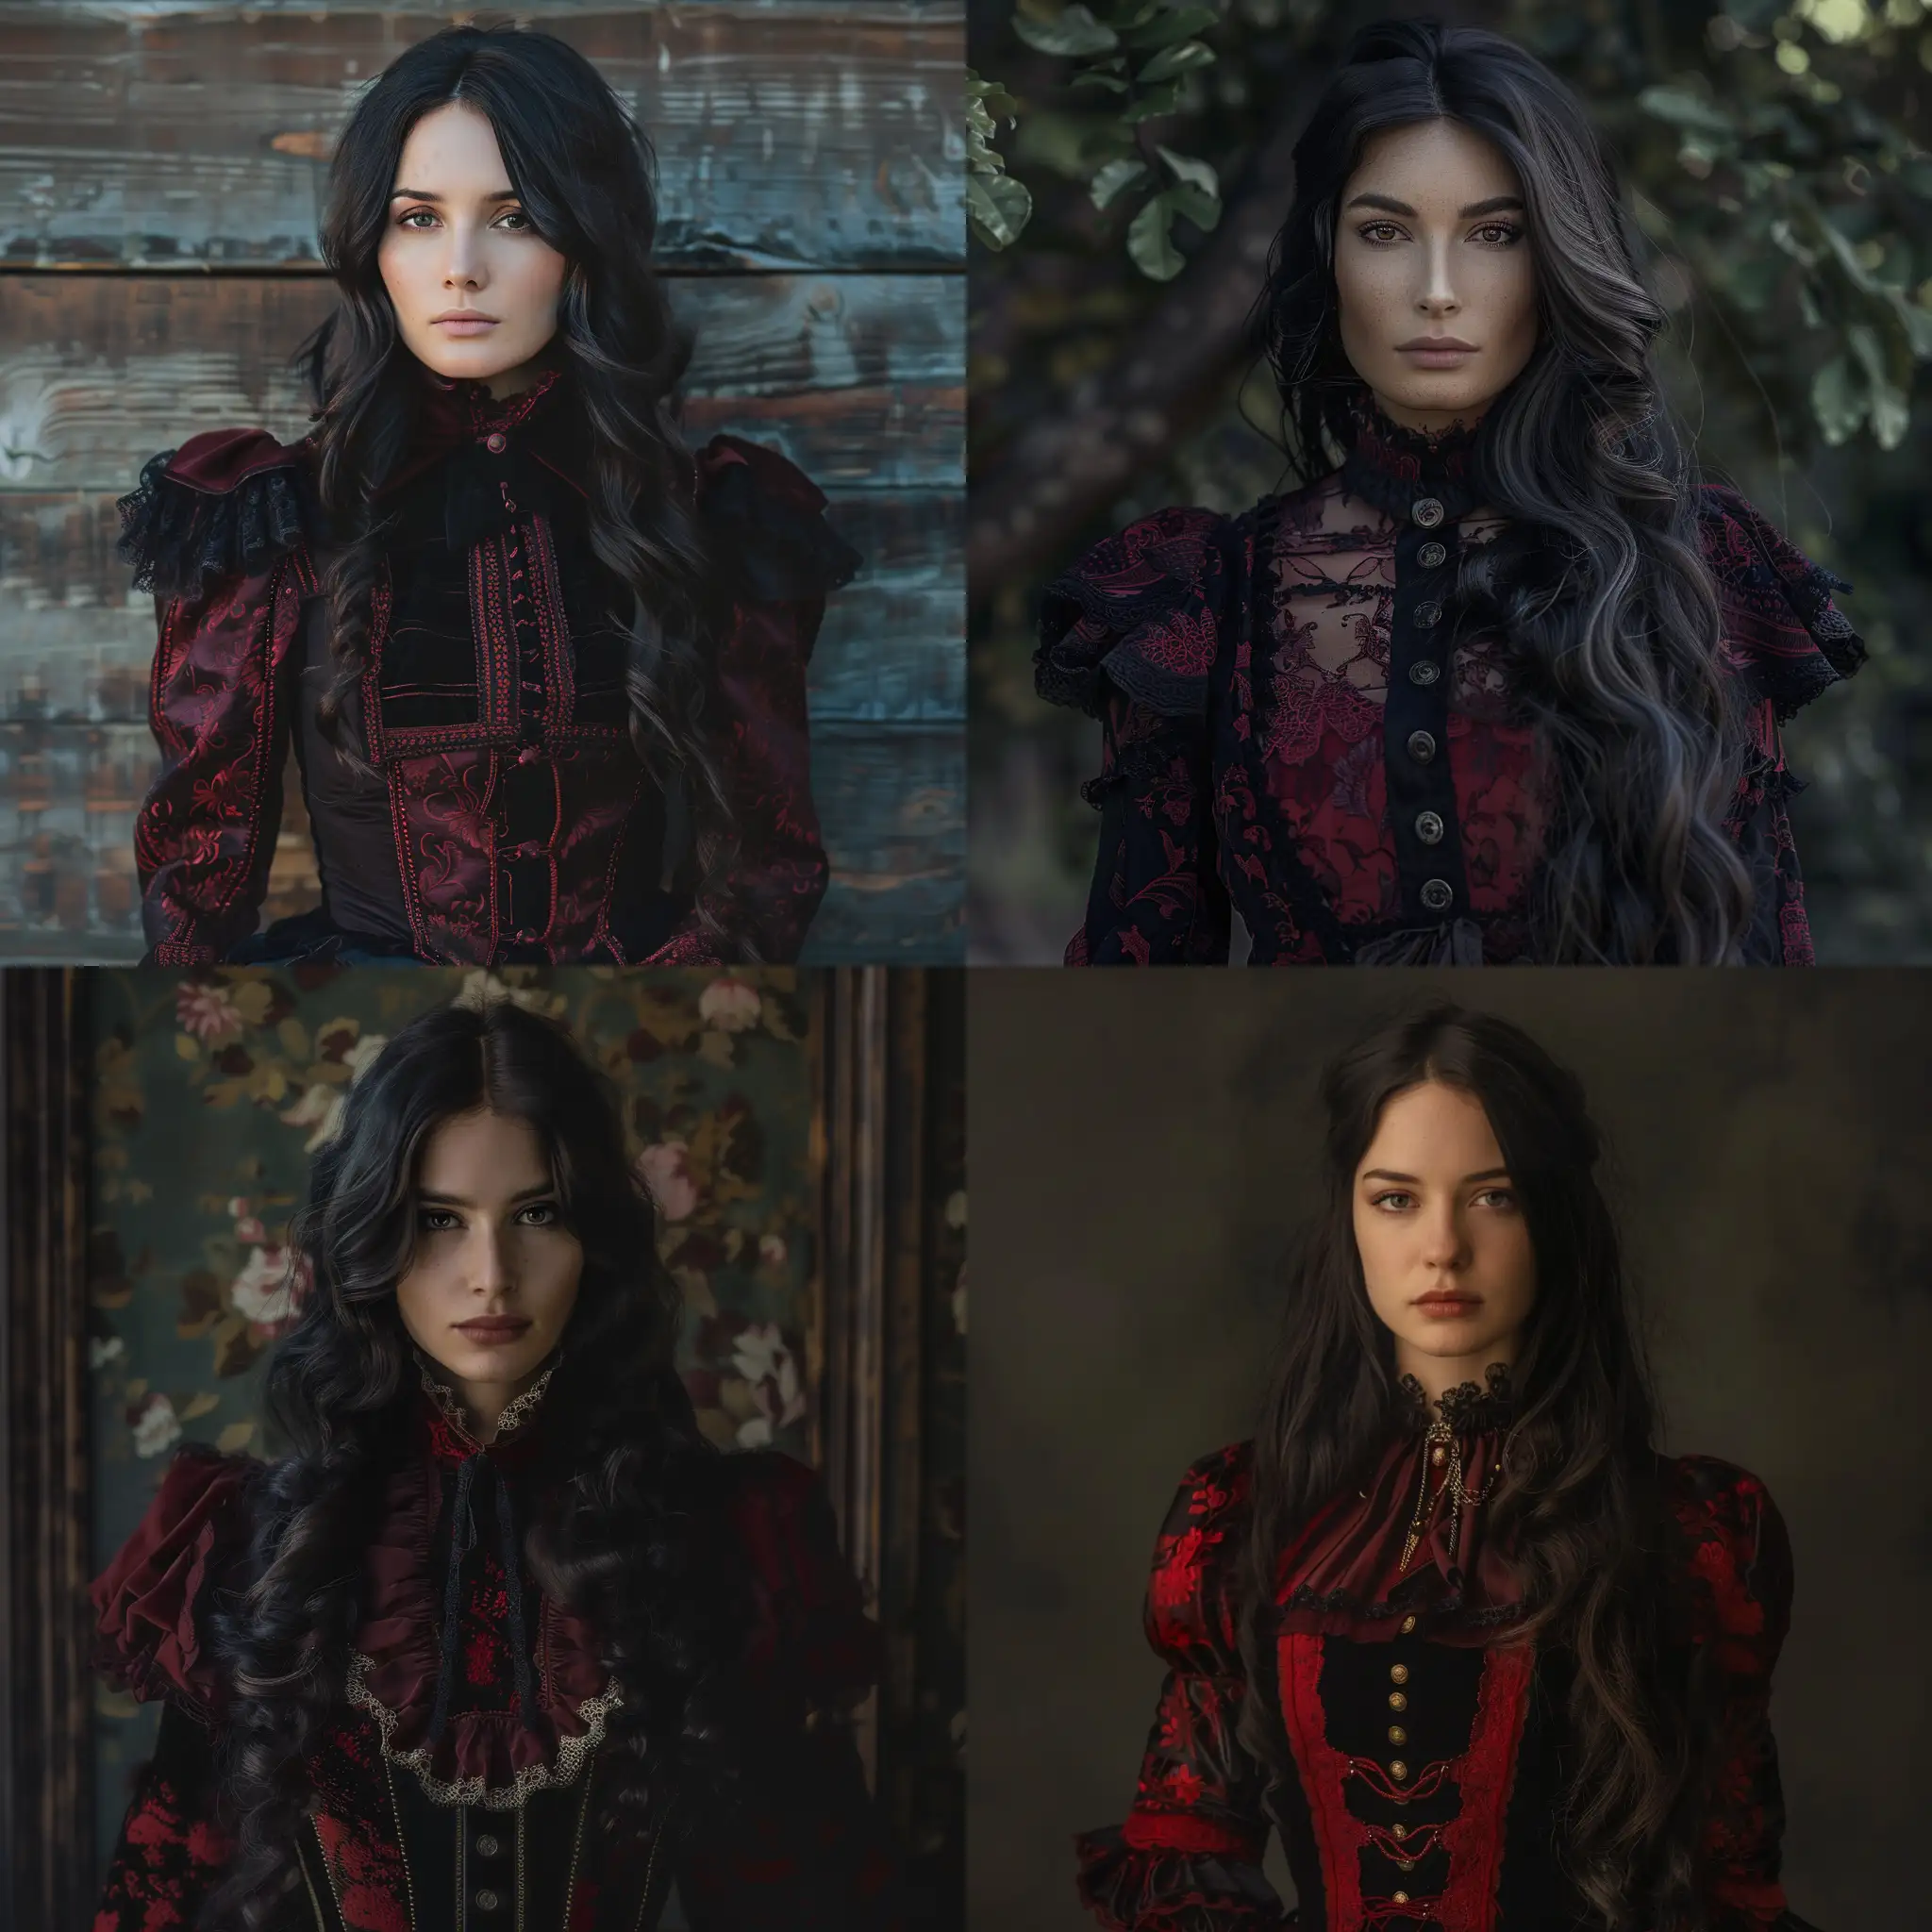 25 years old woman, long dark hair, superreal, no contrast, soft shadows, sharp focus, full body shot, dark and red Victorian clothes